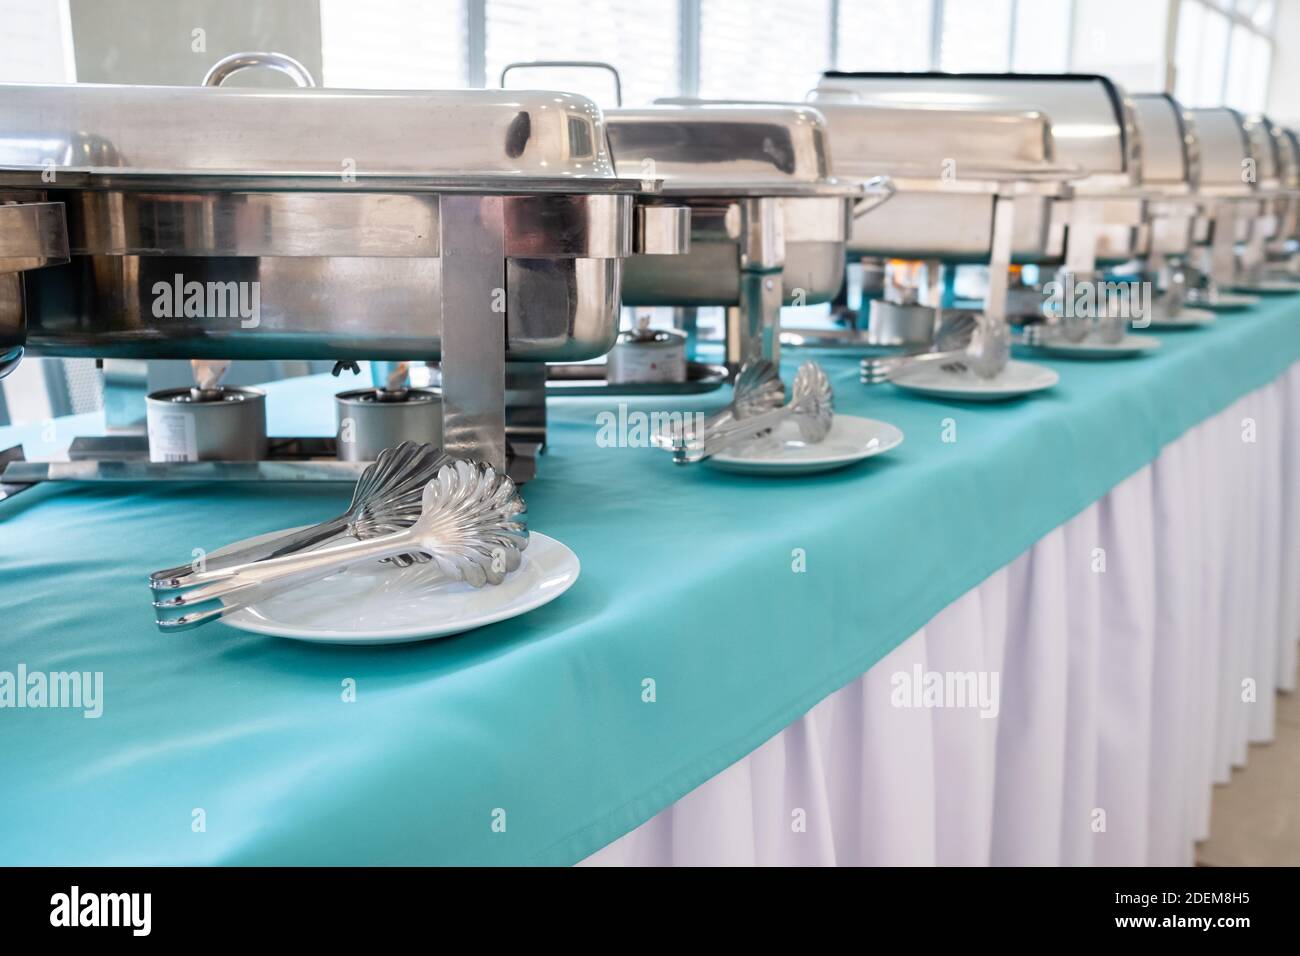 https://c8.alamy.com/comp/2DEM8H5/shiny-metal-food-warmers-stacks-of-plates-and-other-kitchen-equipment-on-the-table-for-a-gourmet-banquet-or-other-service-event-catering-2DEM8H5.jpg